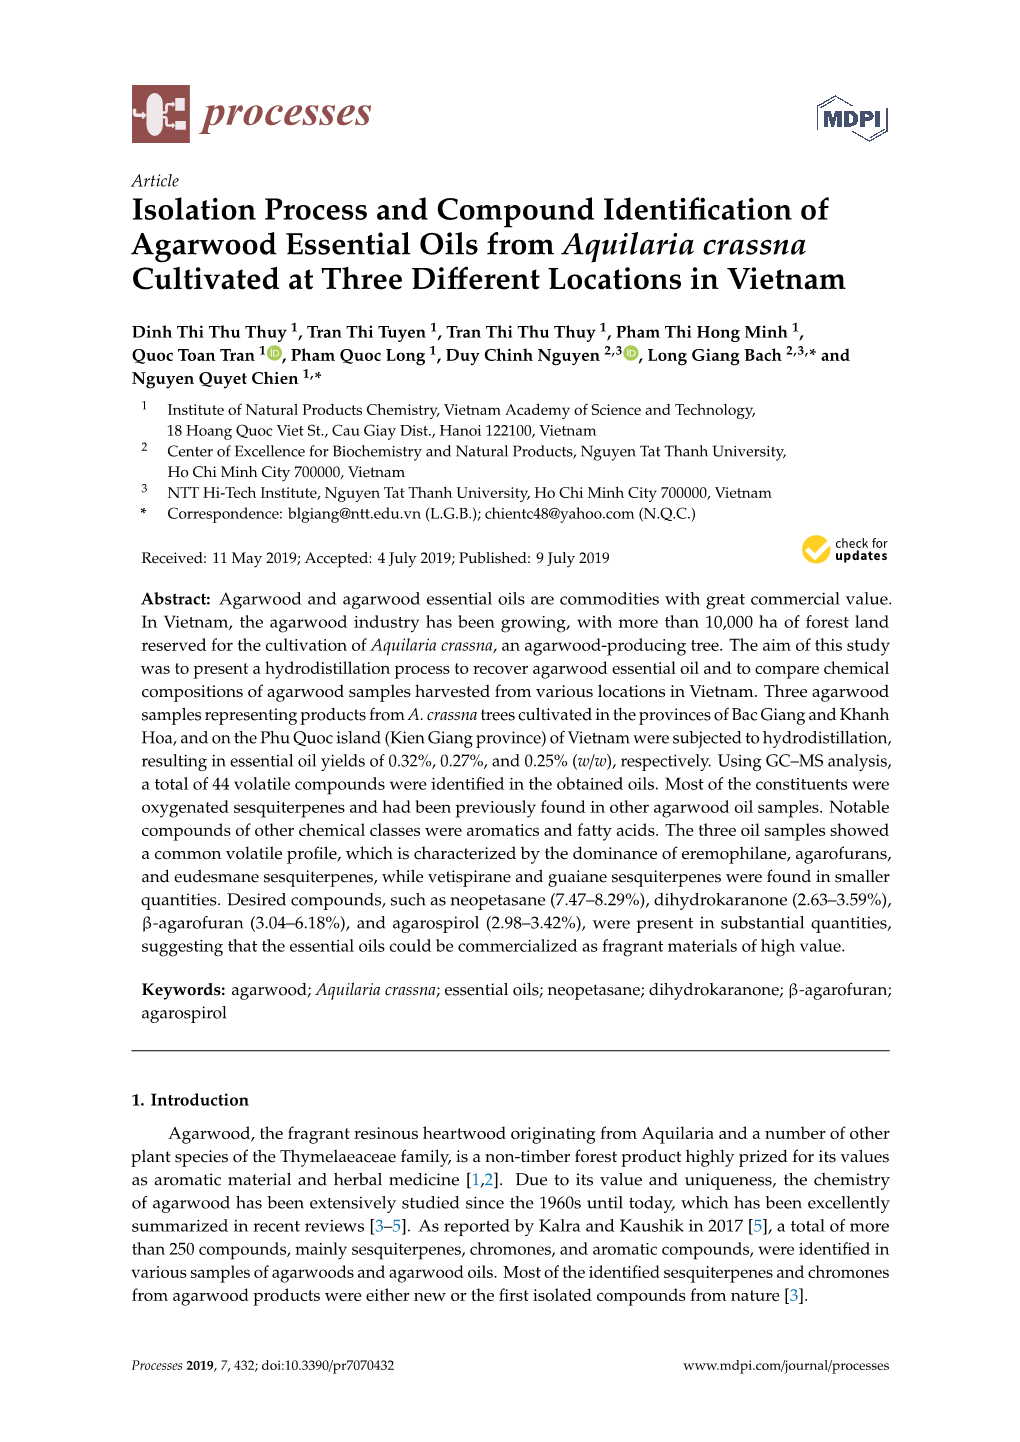 Isolation Process and Compound Identification of Agarwood Essential